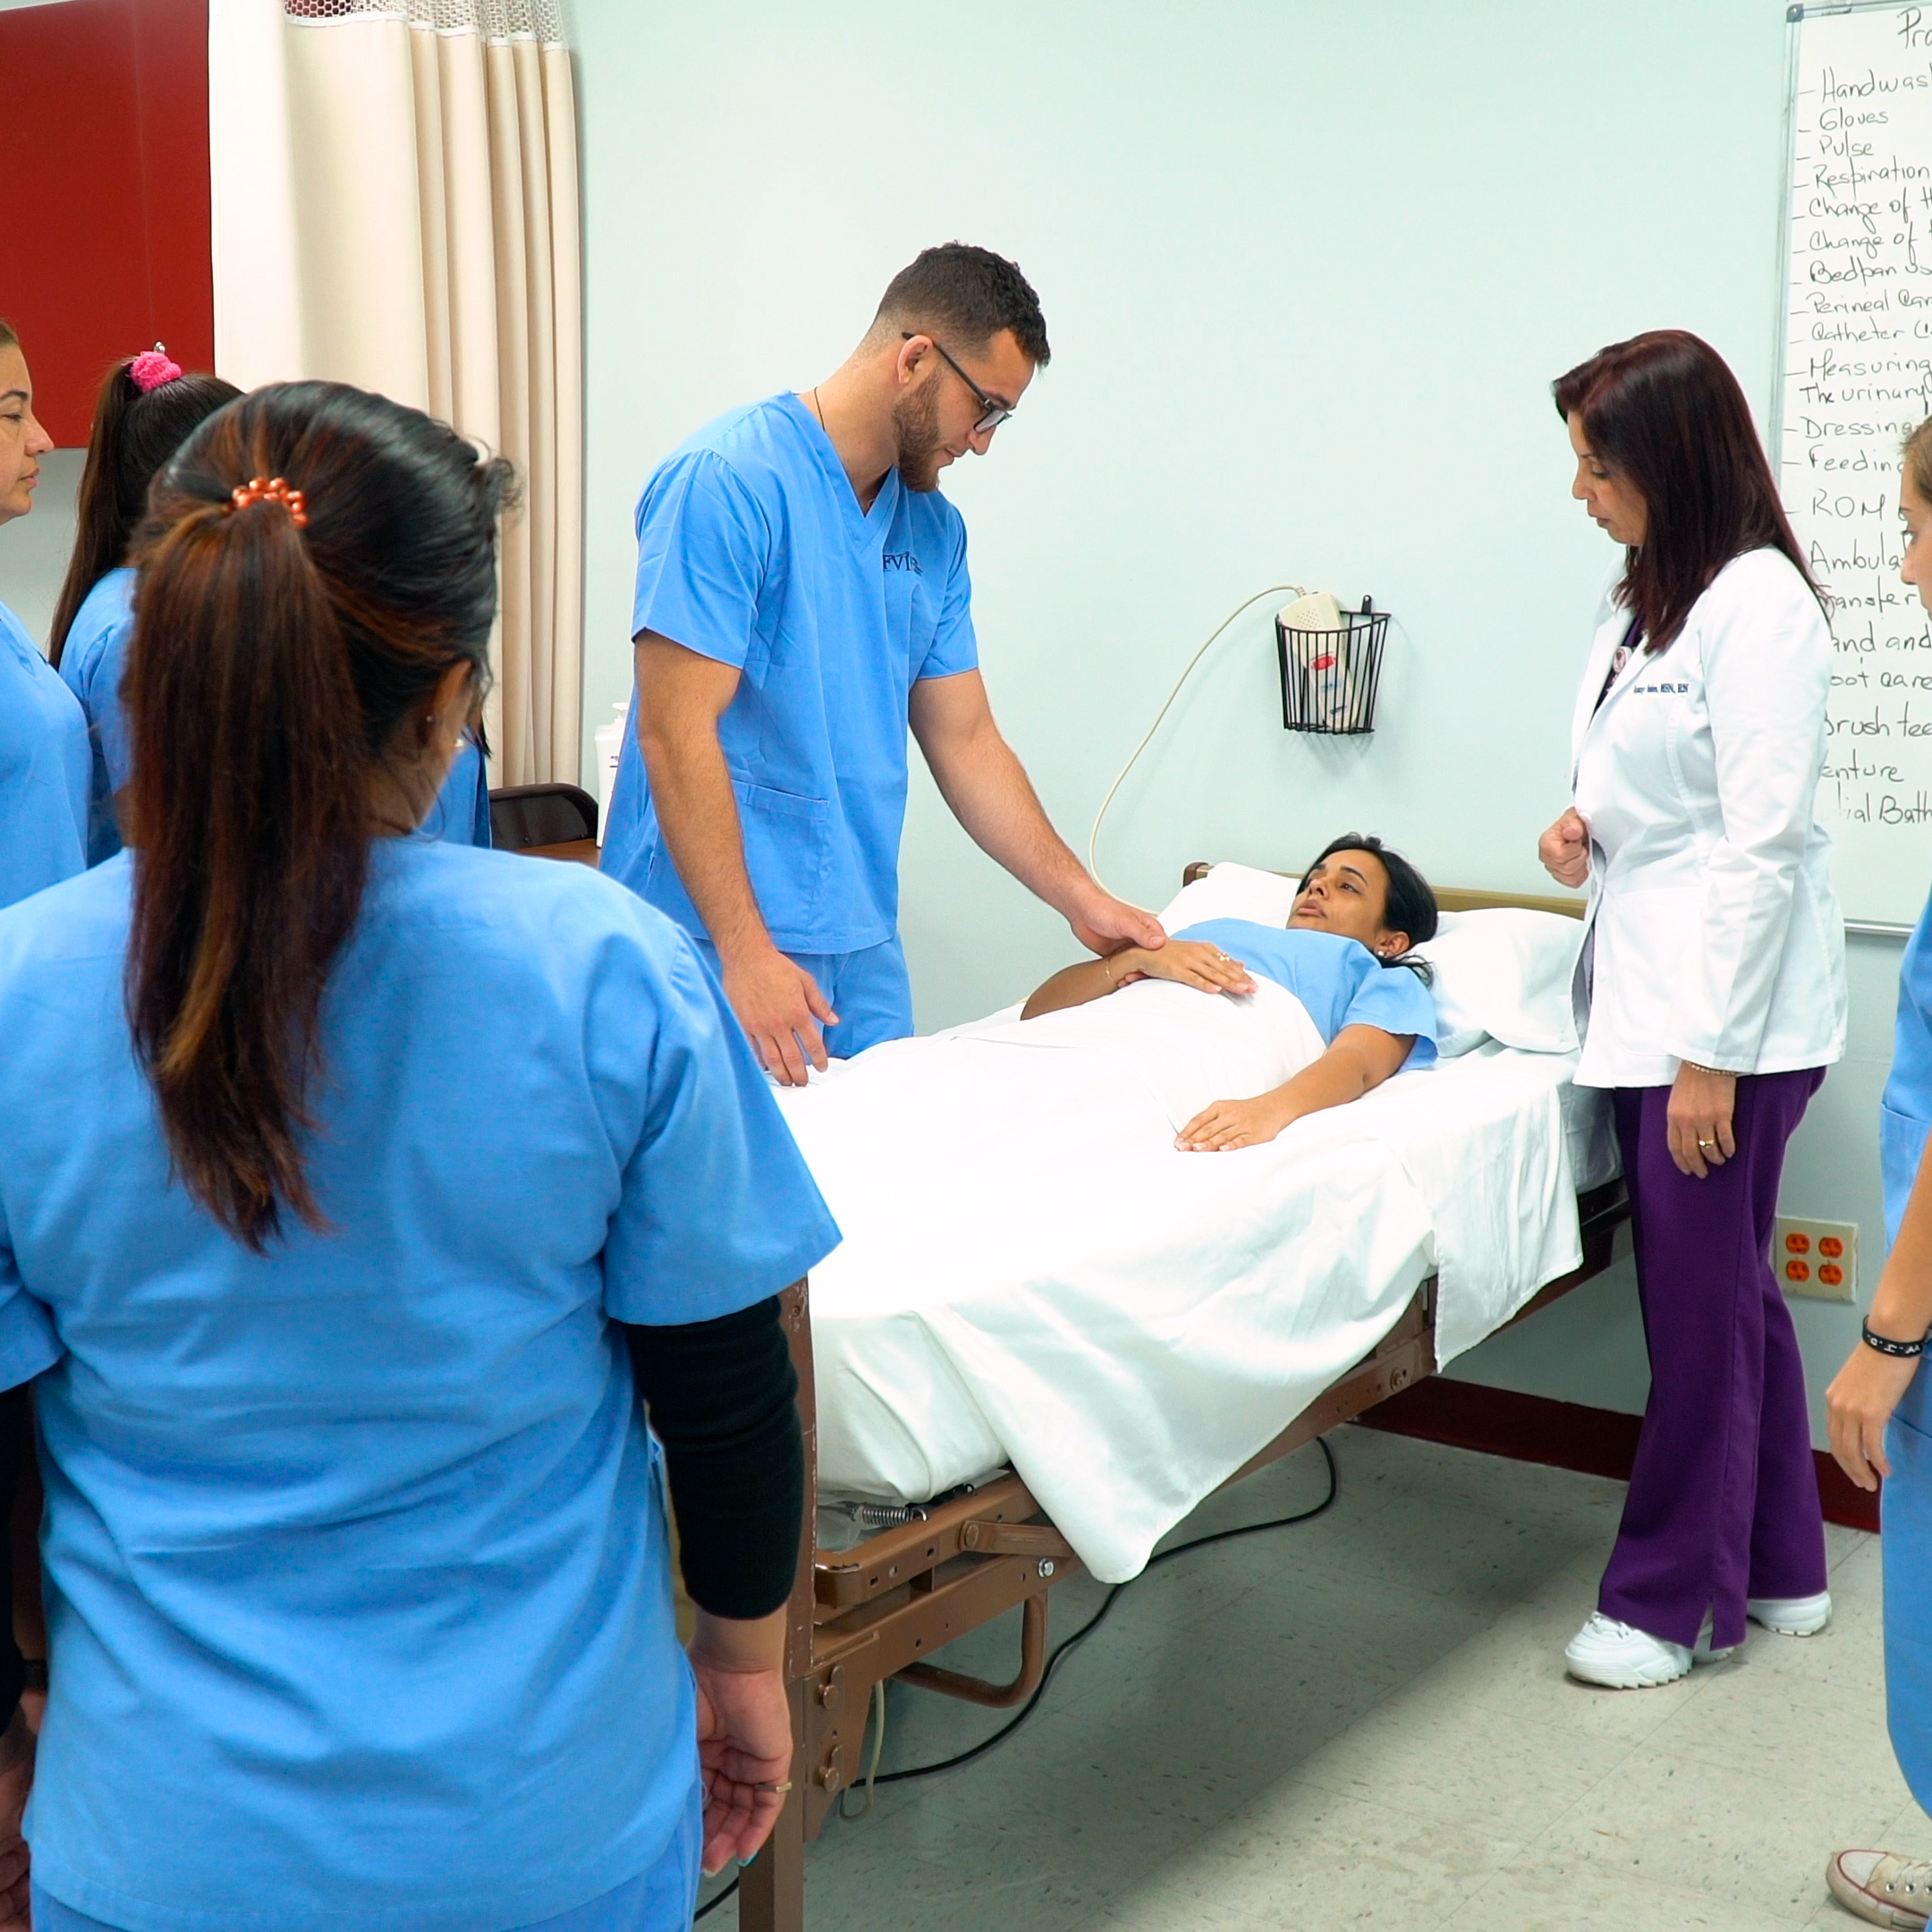 Students gather around a medical simulation